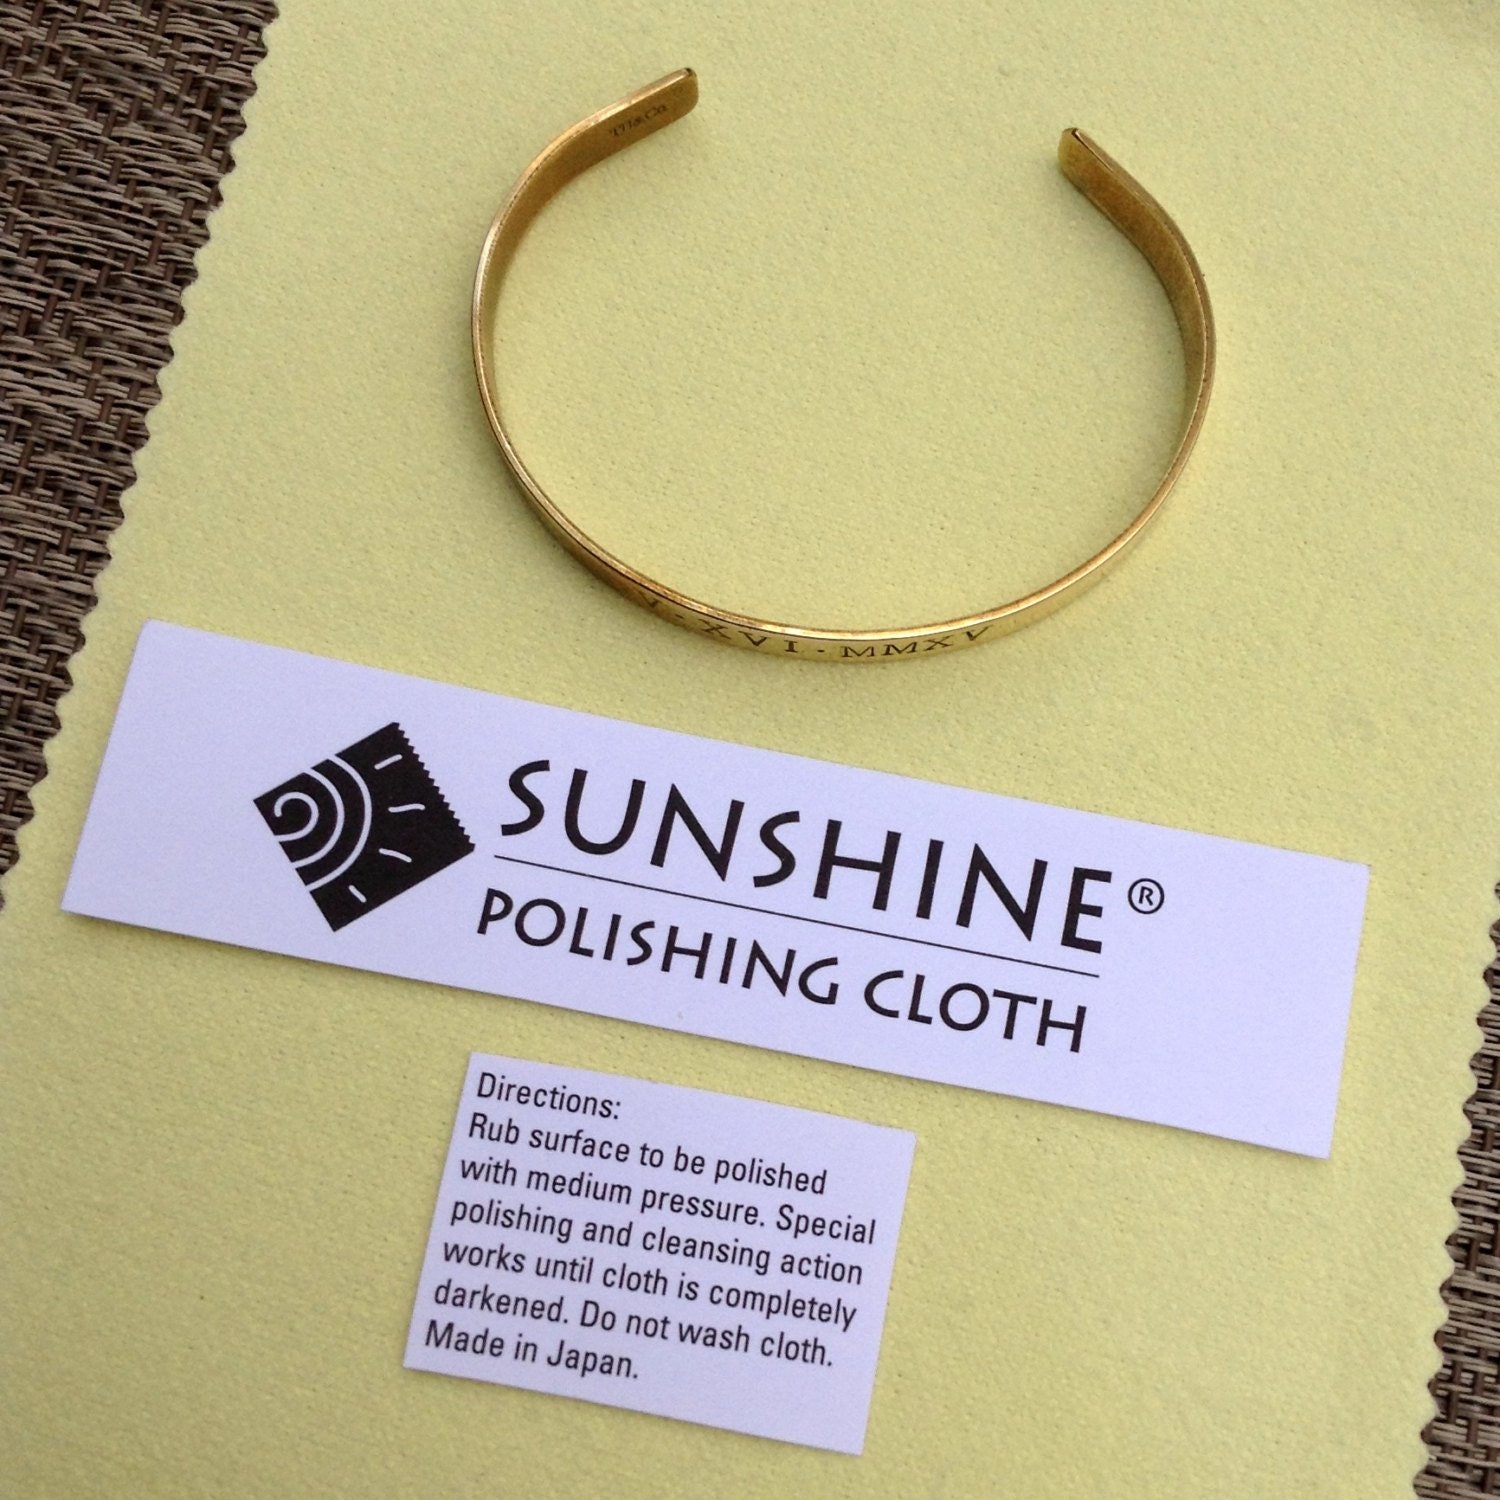 Sunshine Polishing Cloth  Delicate Jewelry Cleaning Cloth - Clothed with  Truth